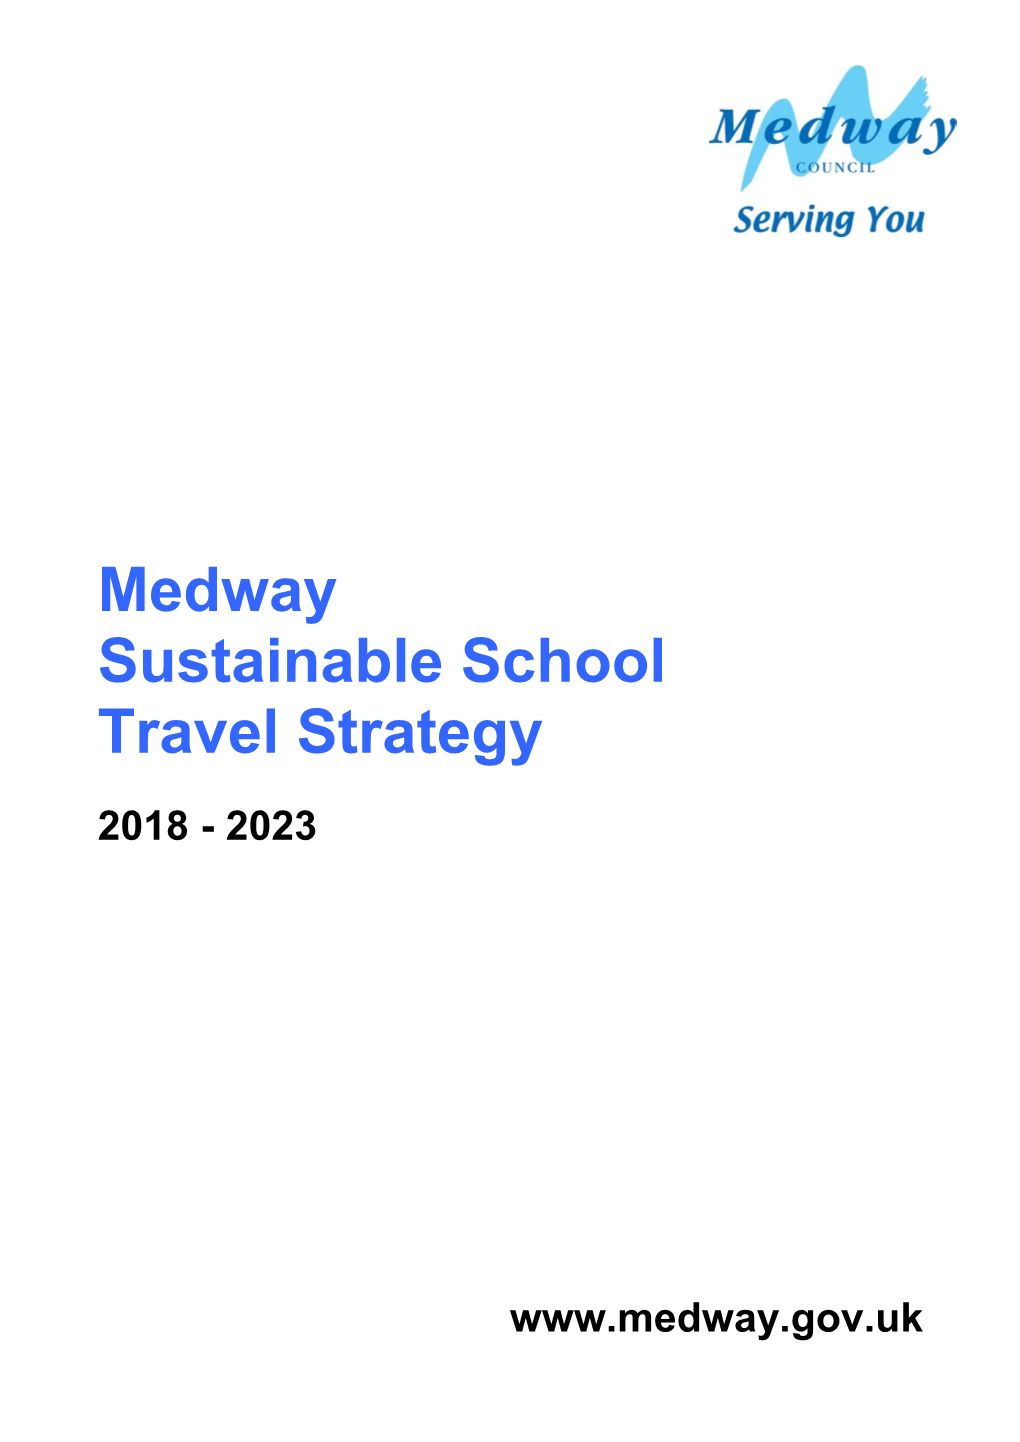 Medway Sustainable School Travel Strategy 2018 - 2023